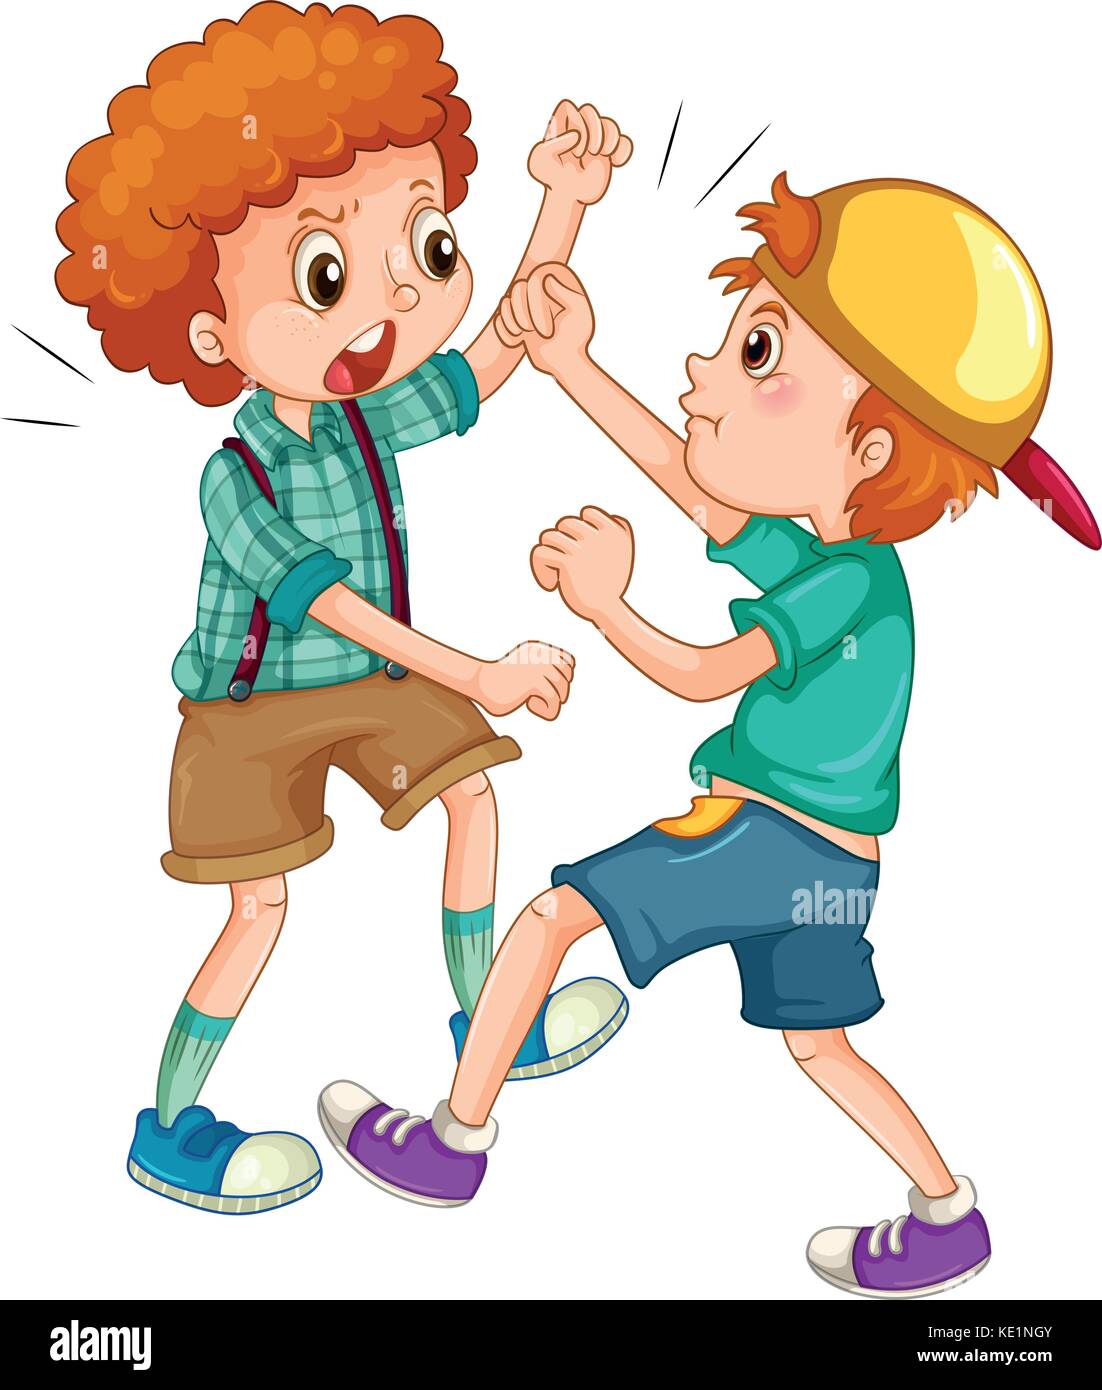 Two boys fighting each other illustration Stock Vector